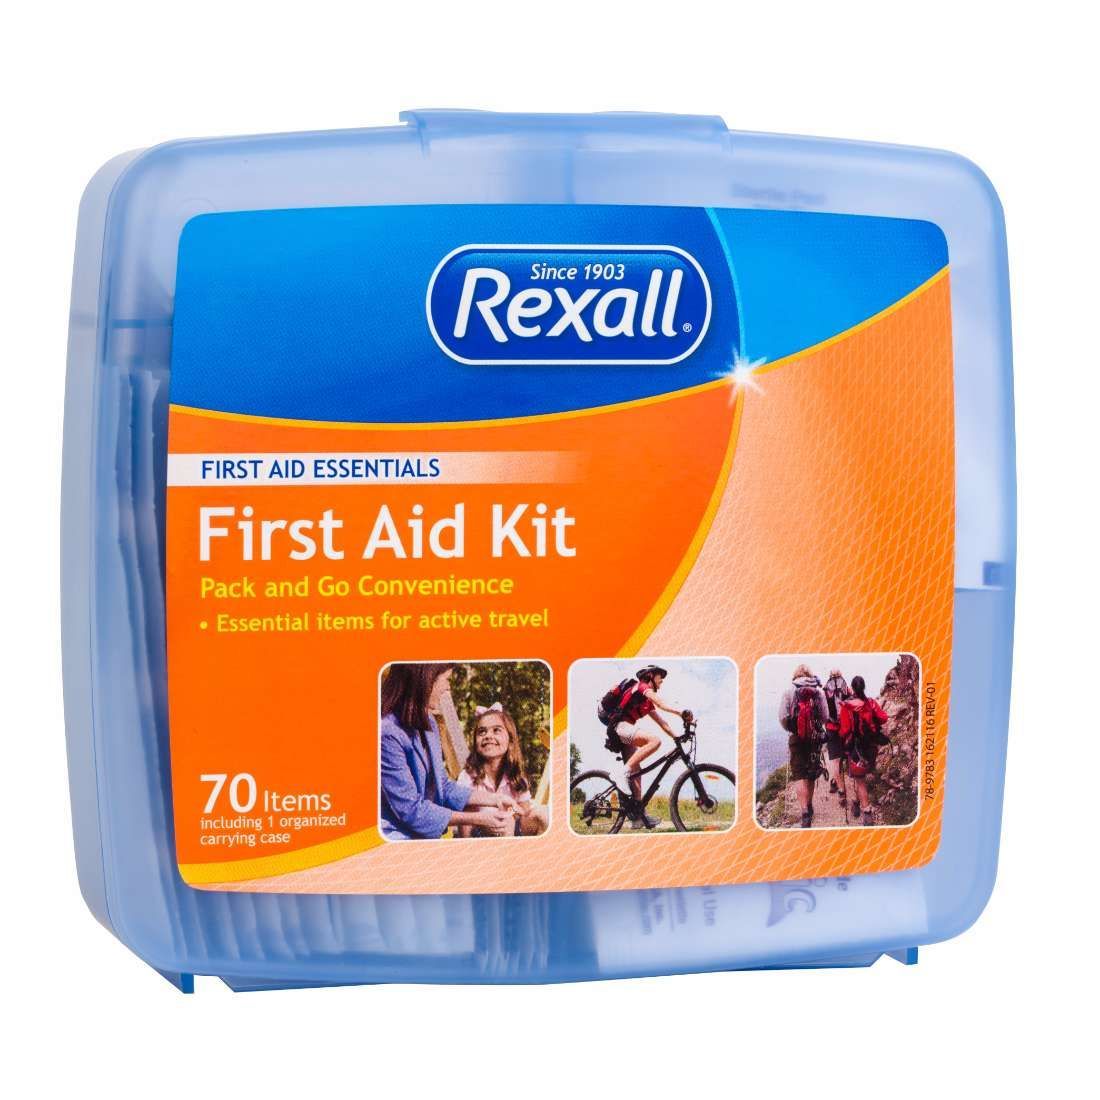 Rexall First Aid Kit, 70 Pieces on Sale At Dollar General